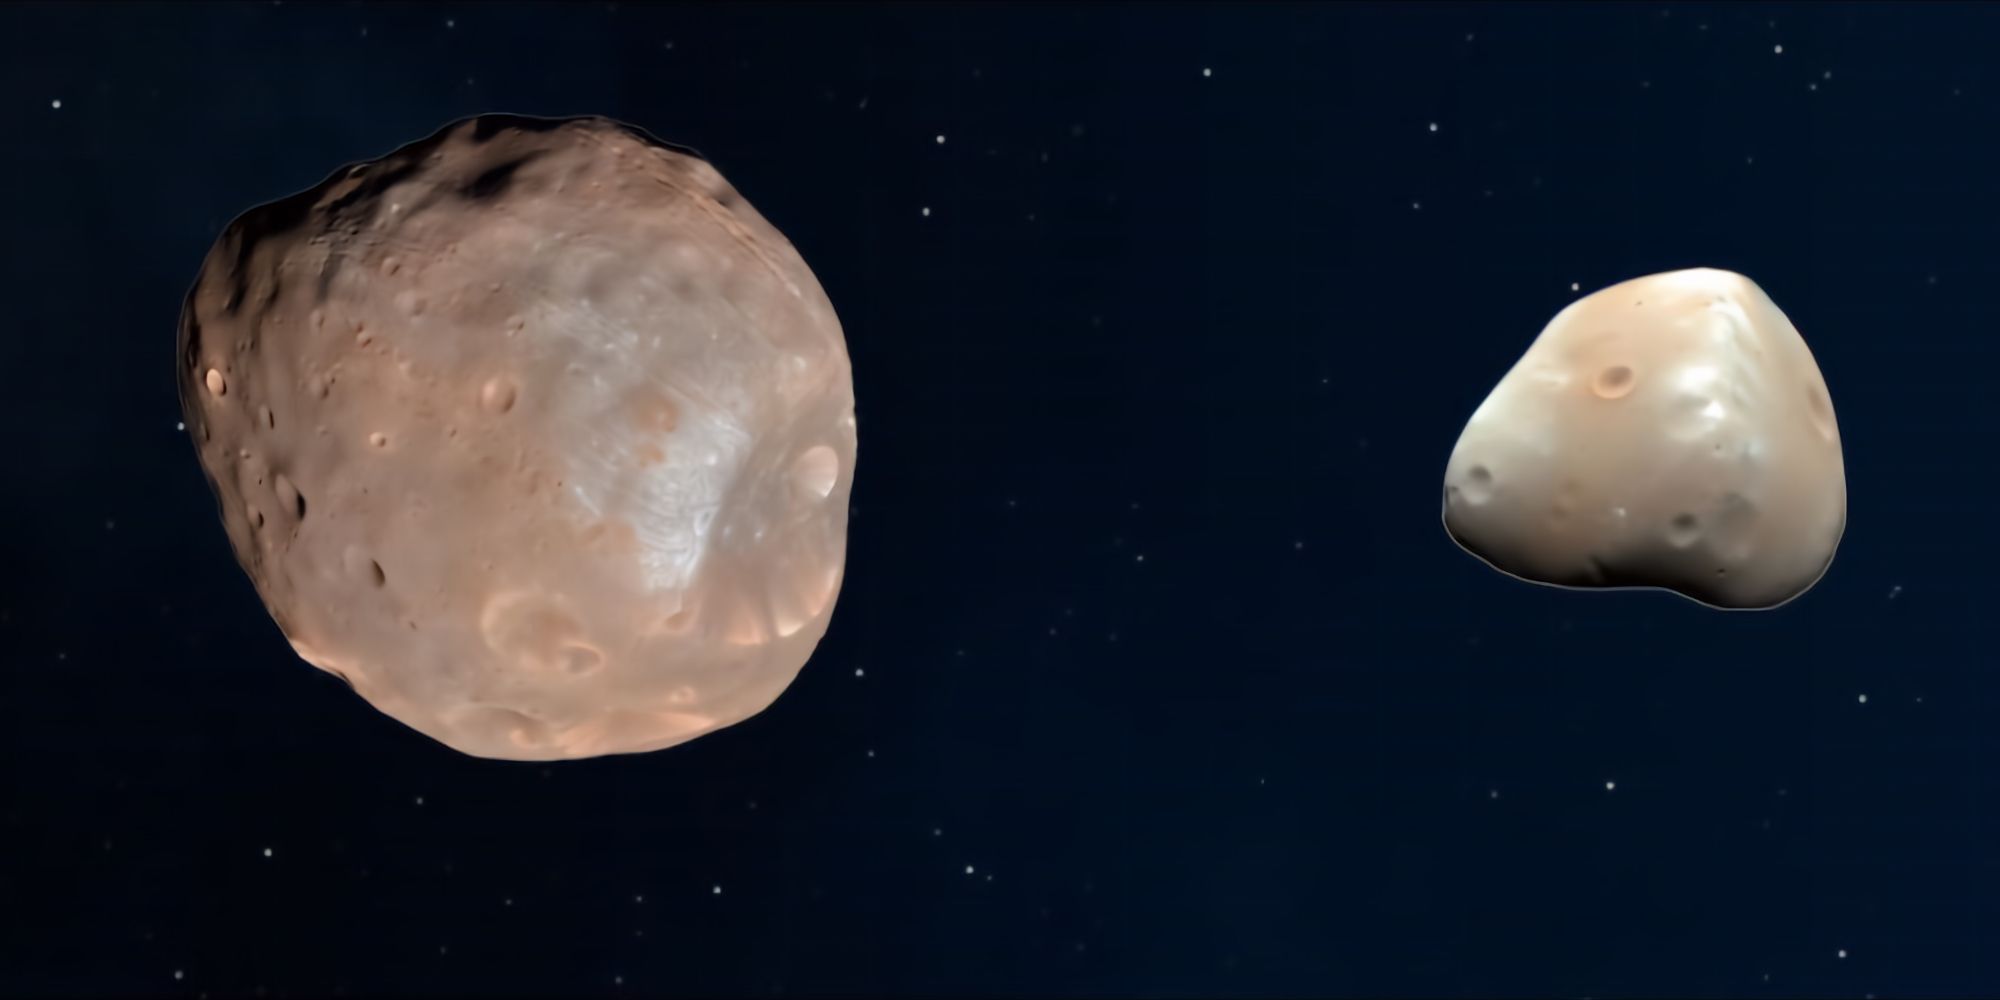 Phobos and Deimos, the two moons of Mars